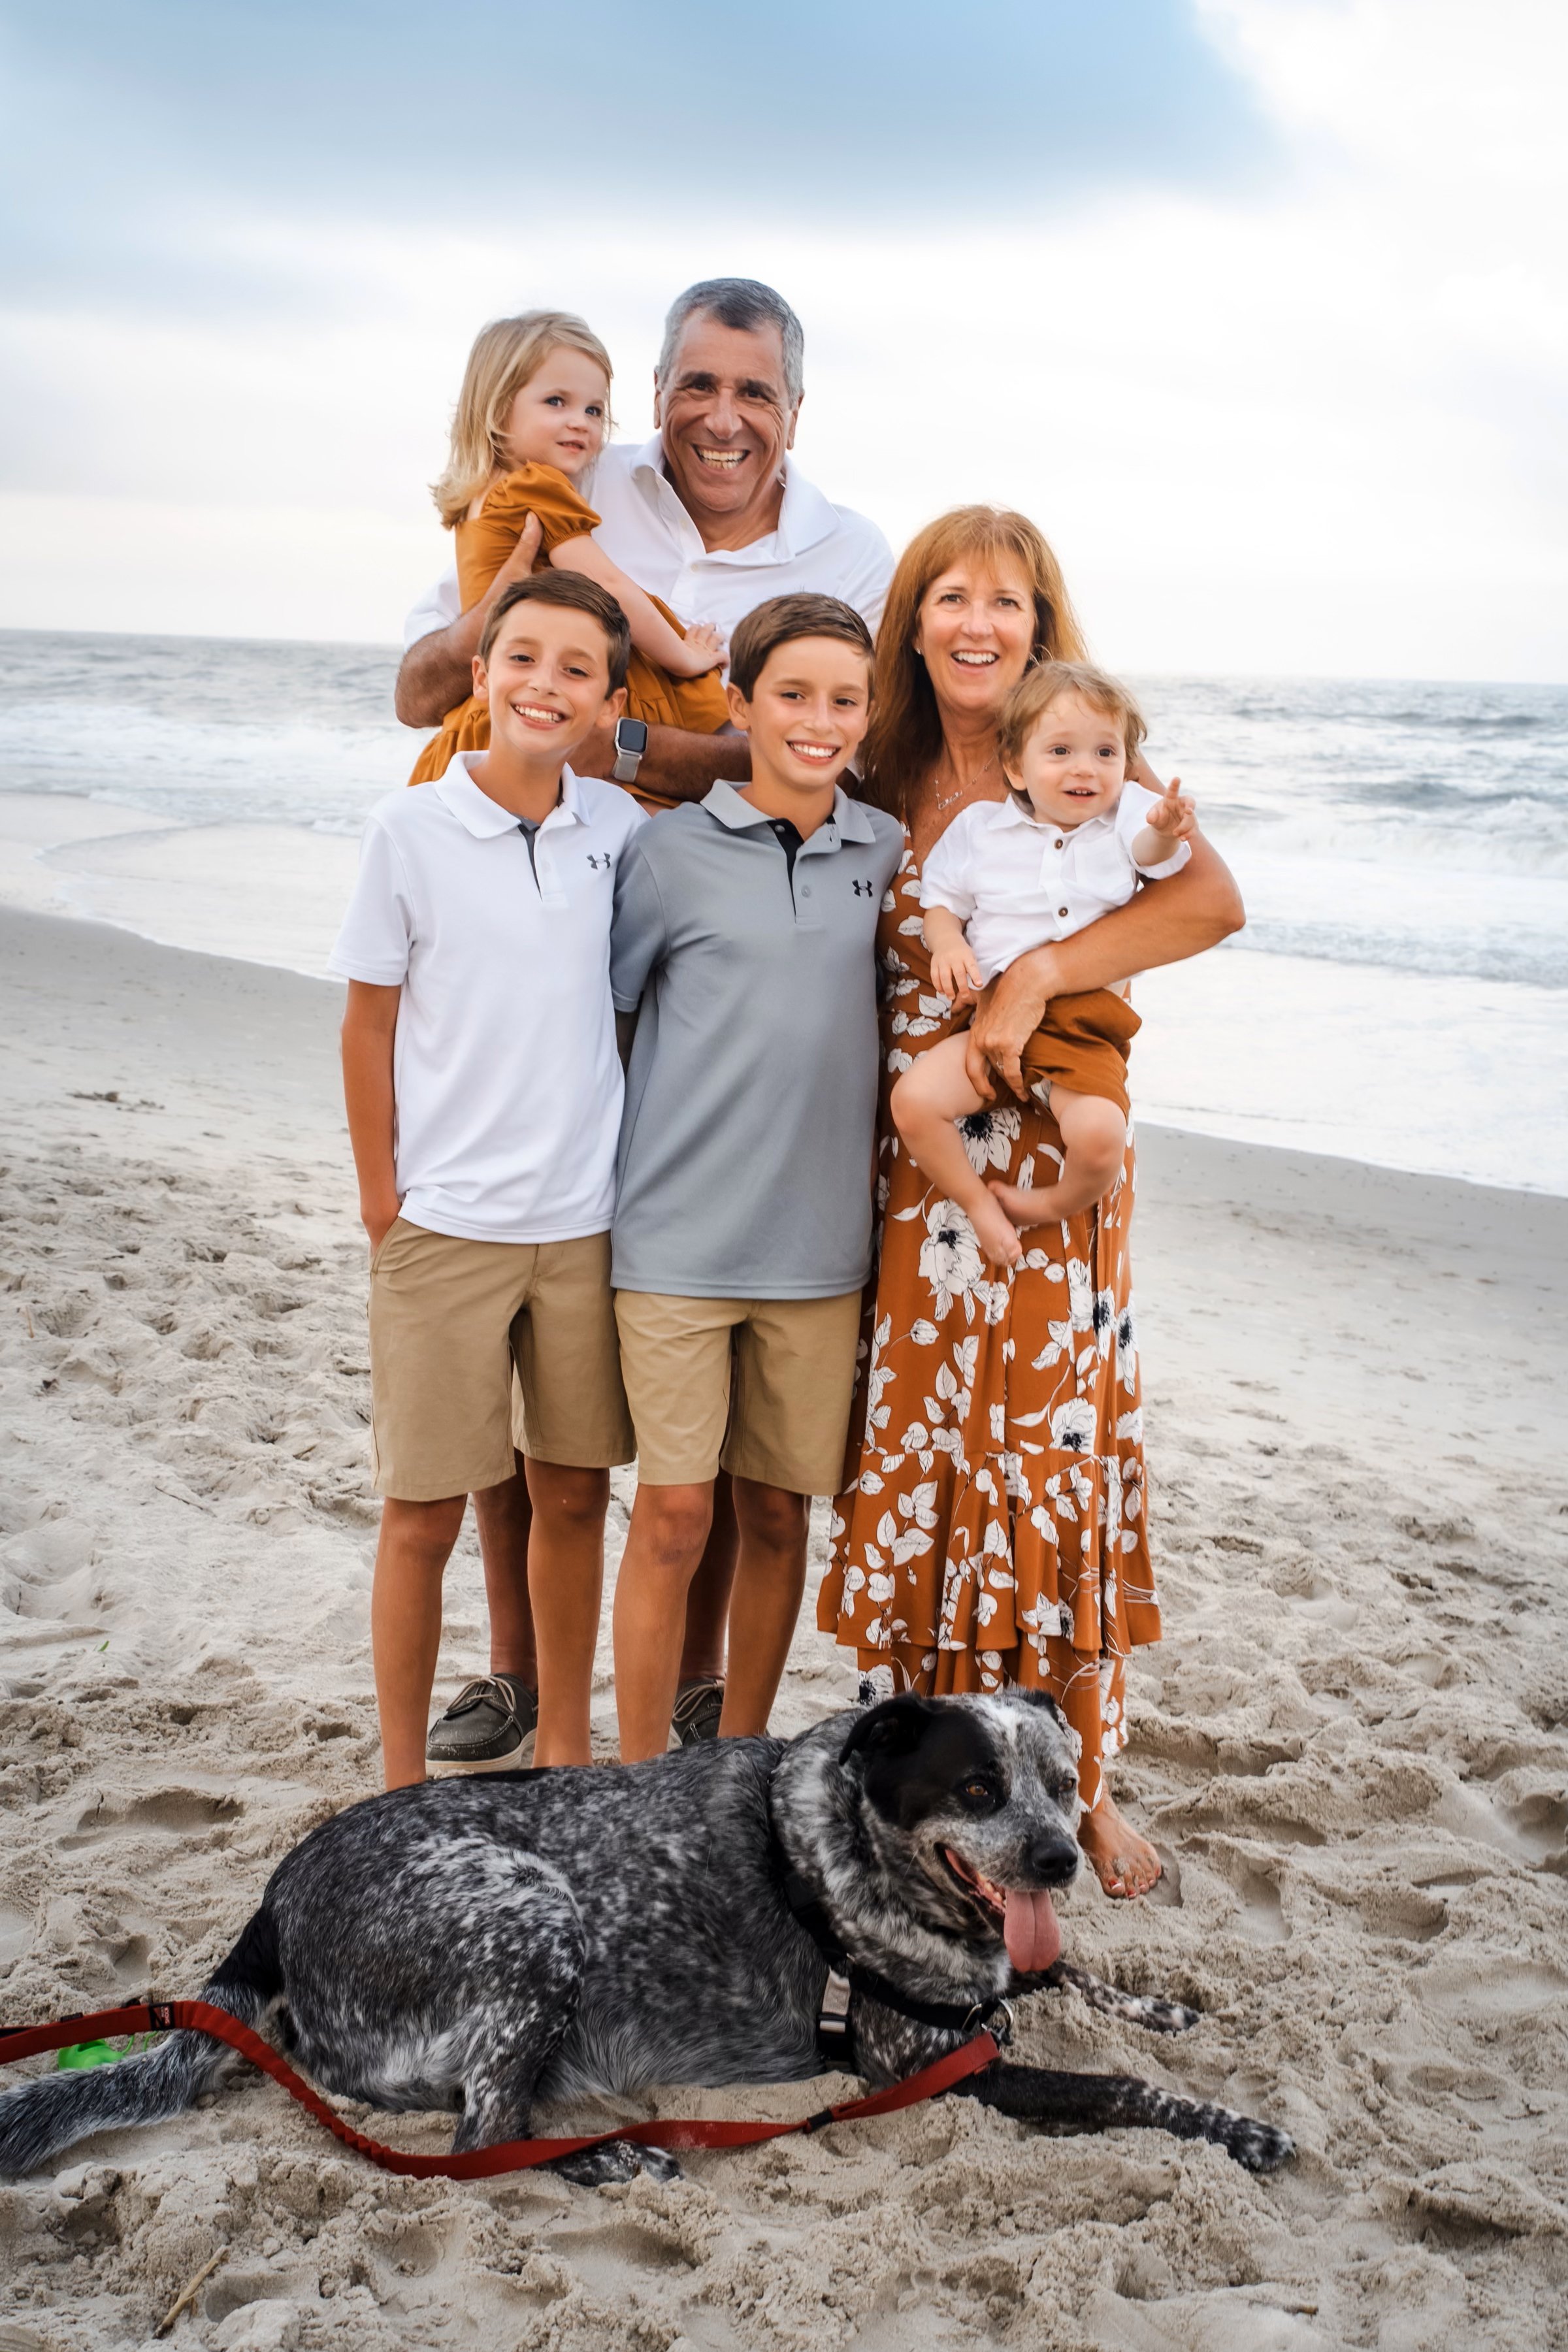 Angelo and Gail Cataldi with their grandchildren Dylan, Chase, Delaney and Dash on the beach in Sea Isle City. And that’s Bently lying in the sand.